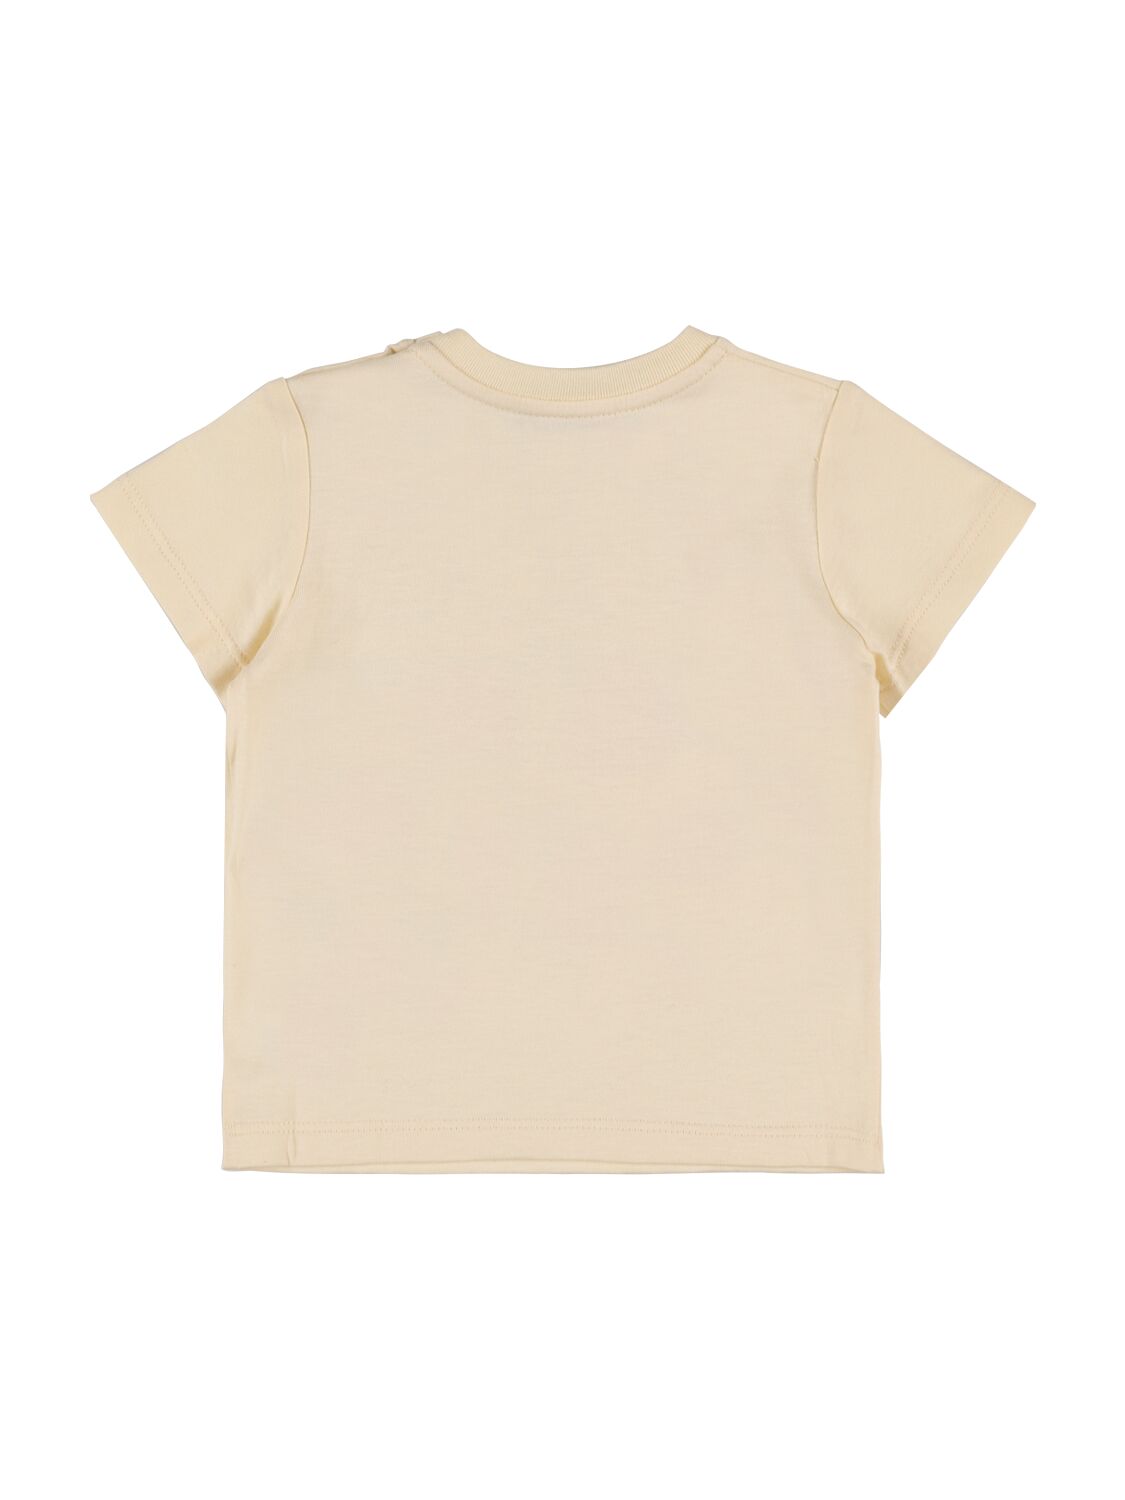 Shop Gucci Peter Rabbit Cotton Jersey T-shirt In Sunkissed,red